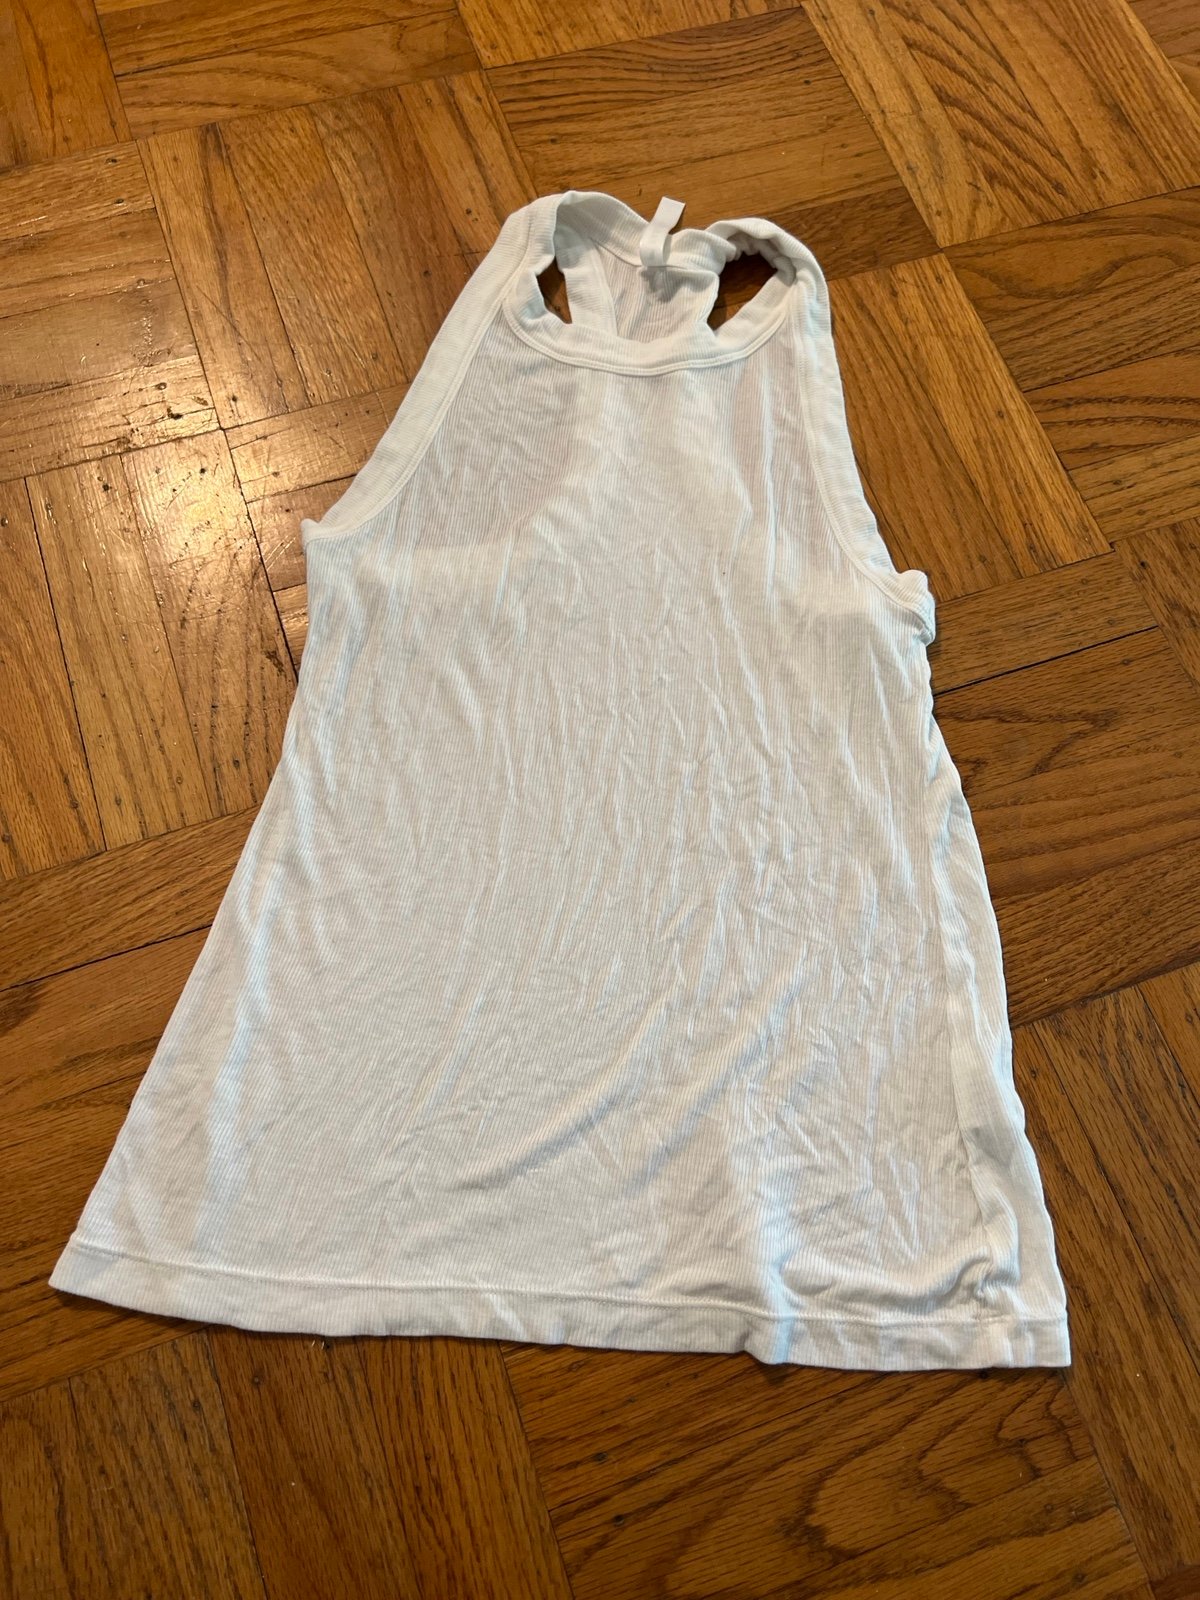 cheapest place to buy  Fabletics white tank ownaTUCLX for sale